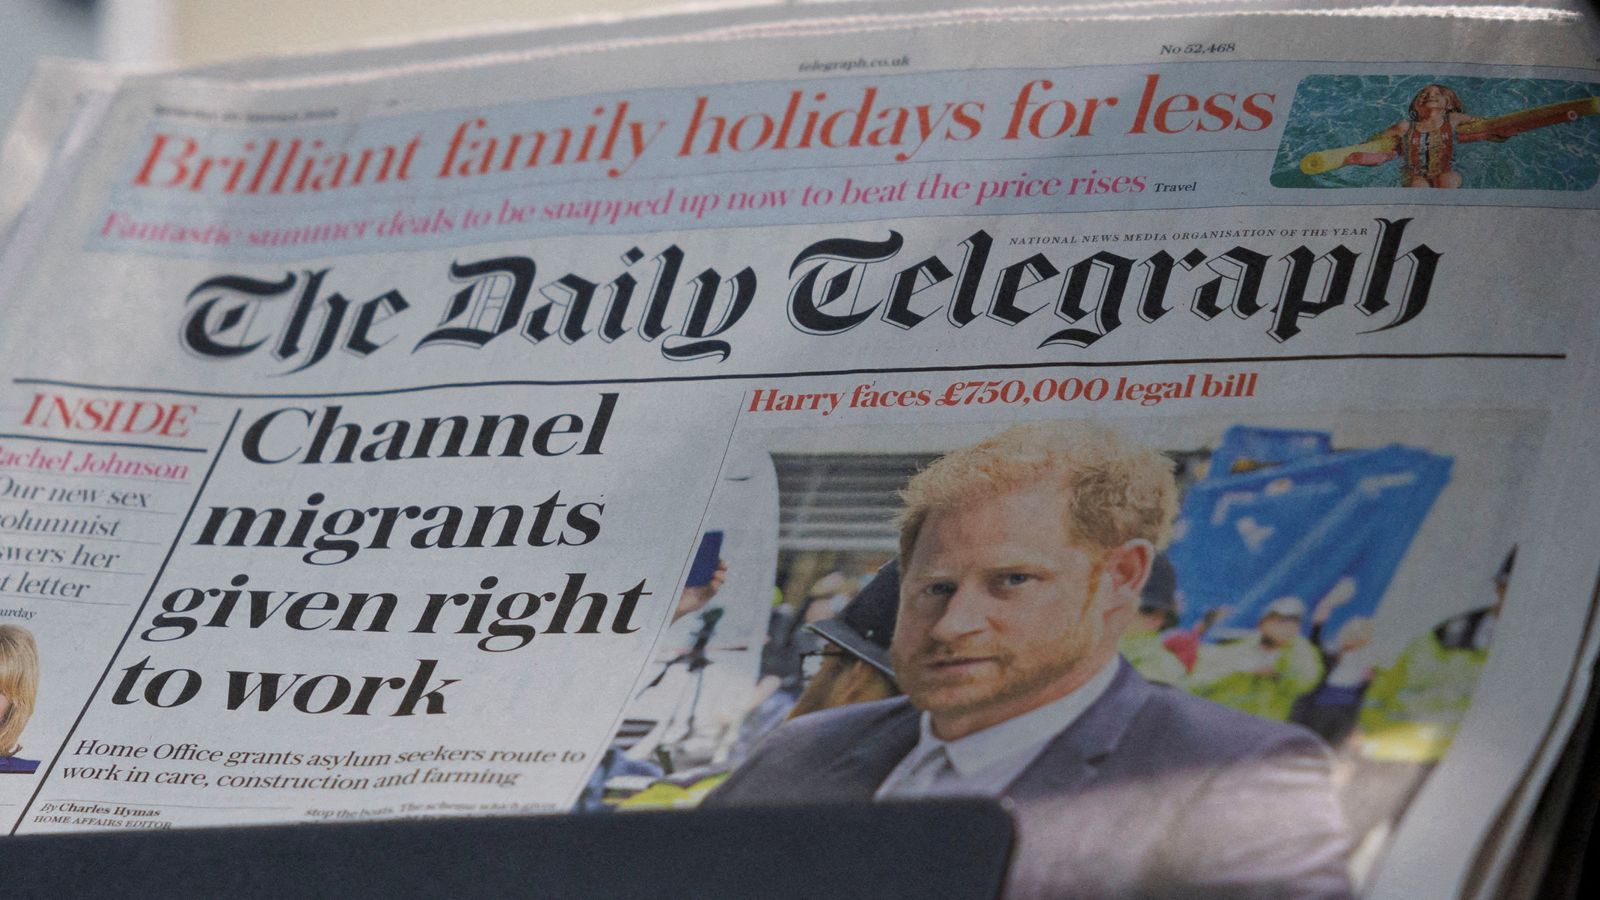 Telegraph acquisition may  'operate against the public interest', Ofcom says, as investigation enters phase 2